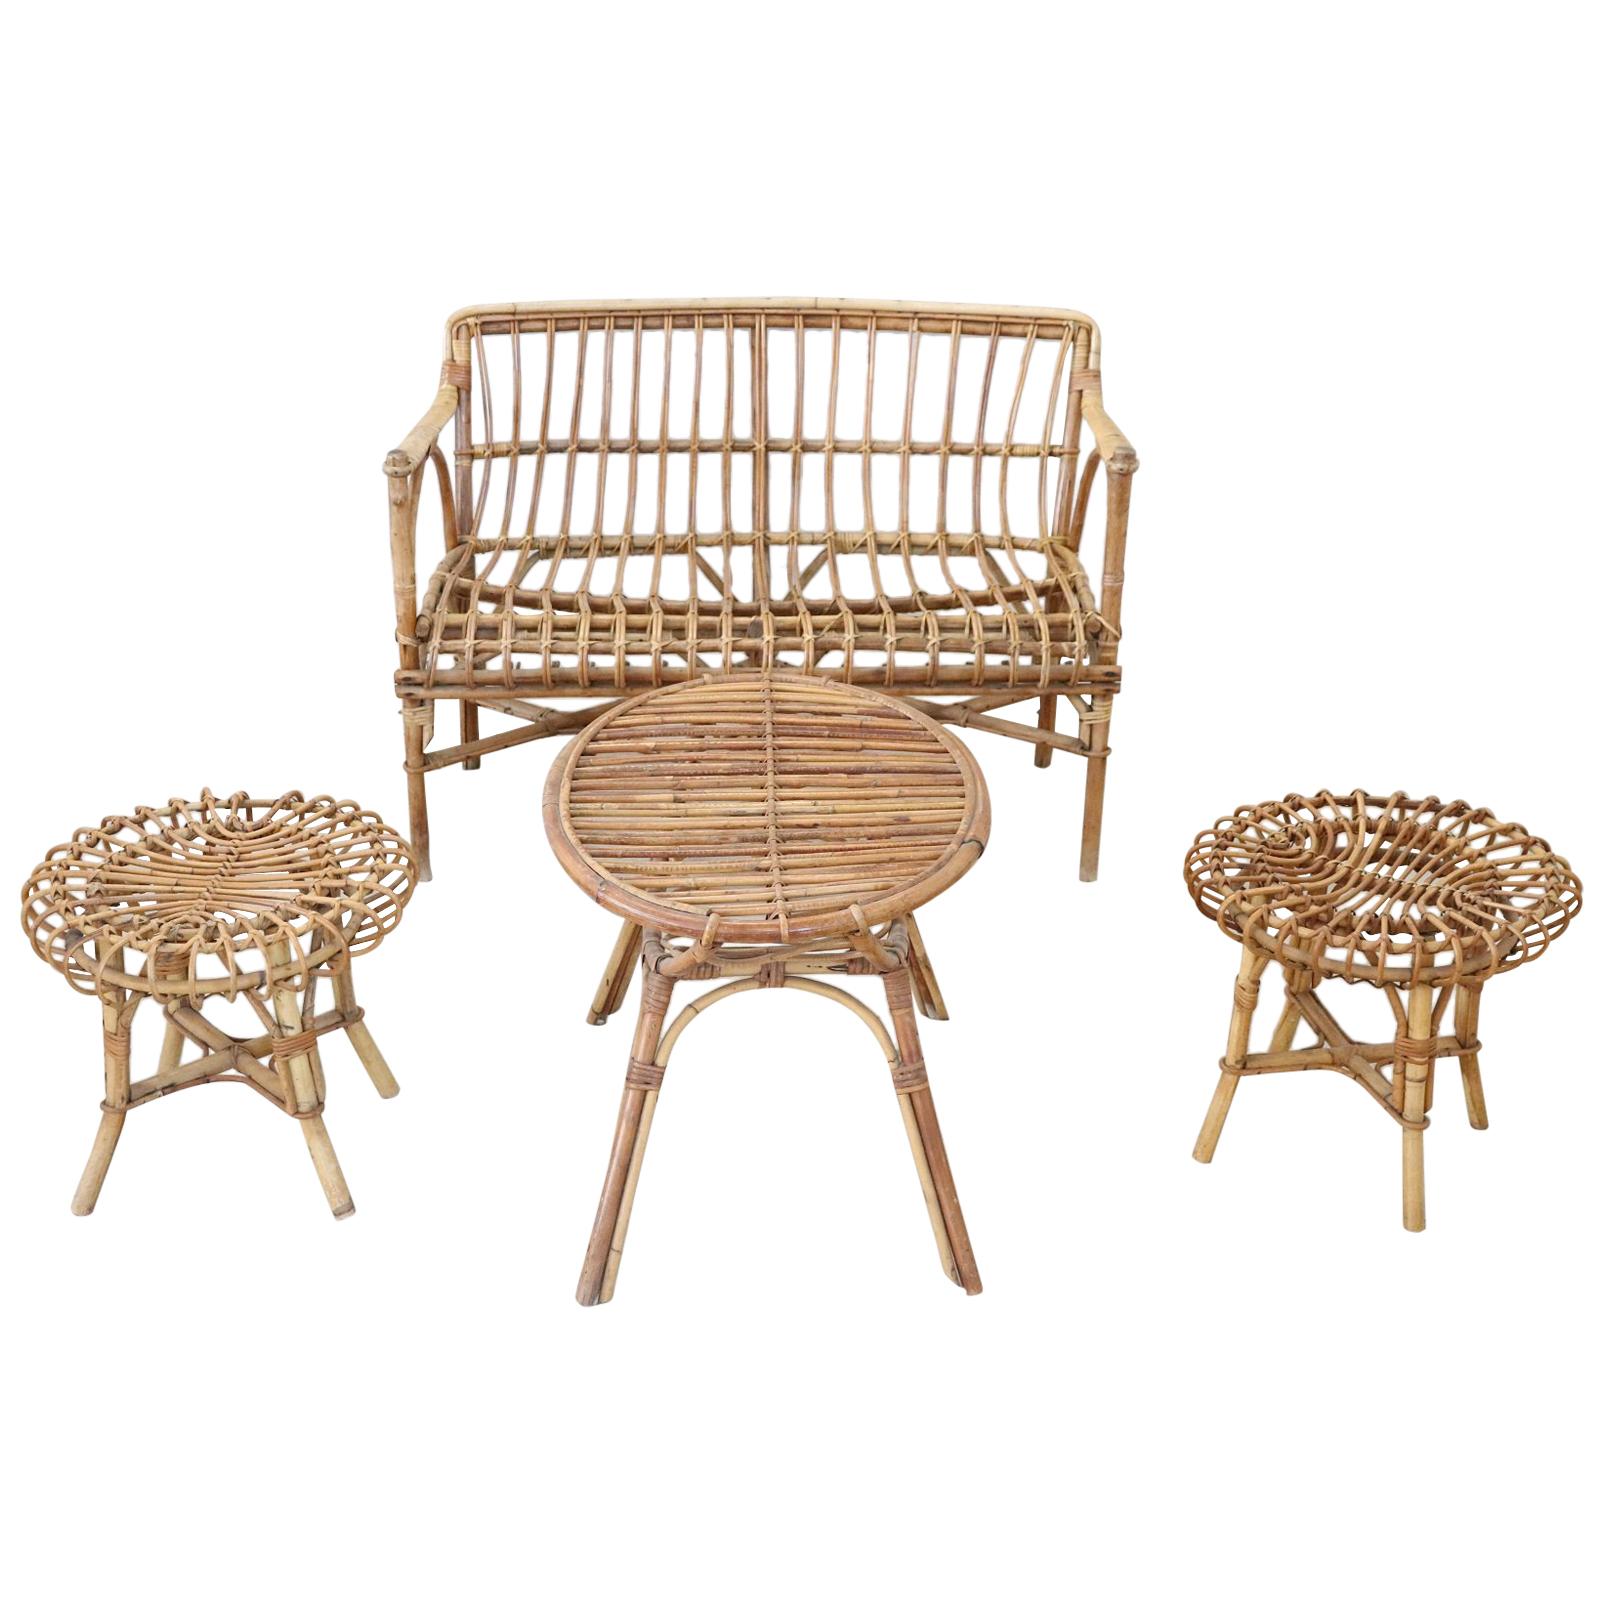 20th Century Italian Bamboo and Rattan Living Room Set of 4 Pieces, 1960s